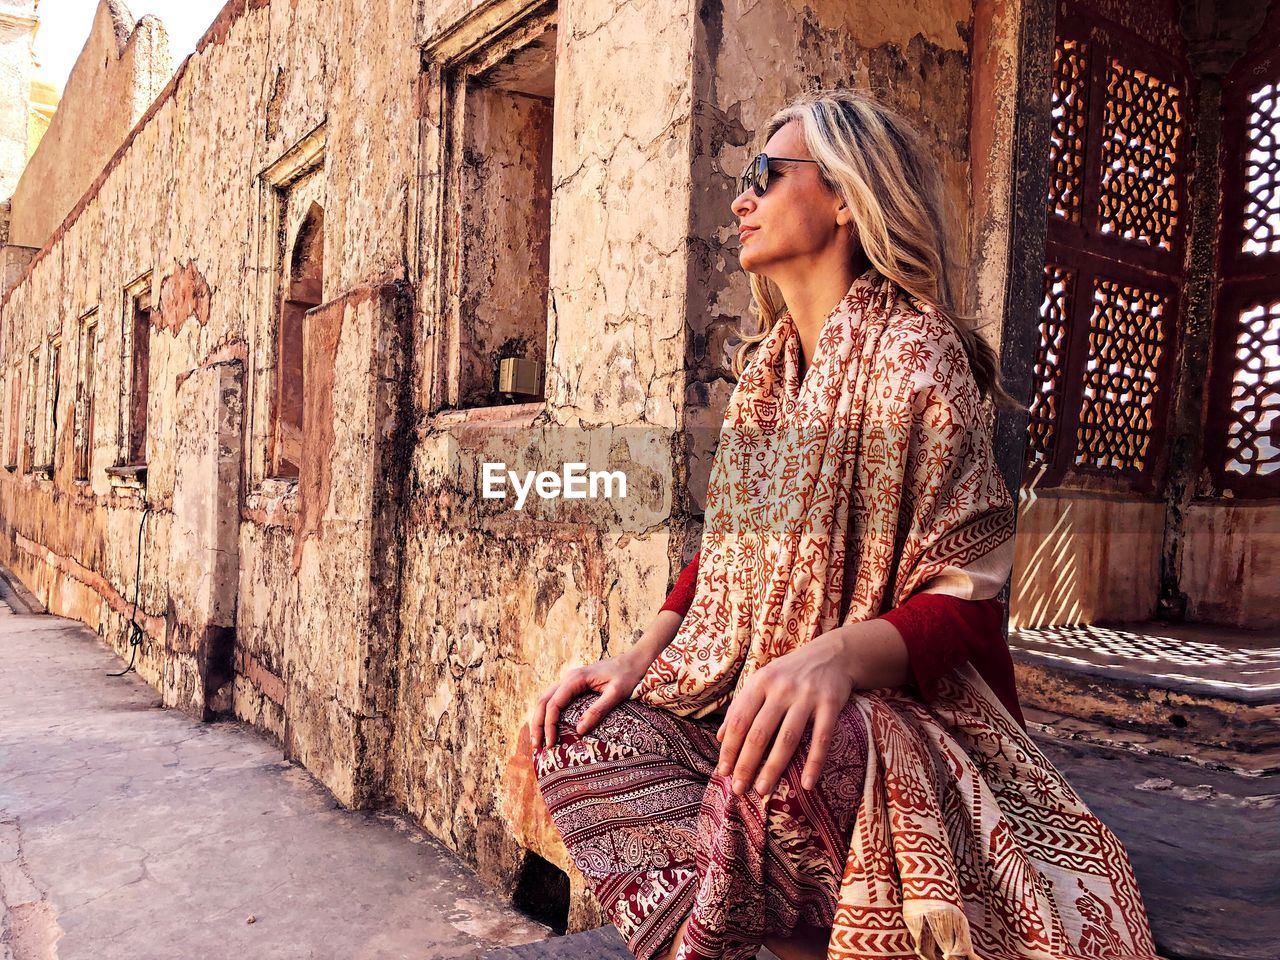 Mature woman wearing sunglasses and traditional clothing sitting against old building